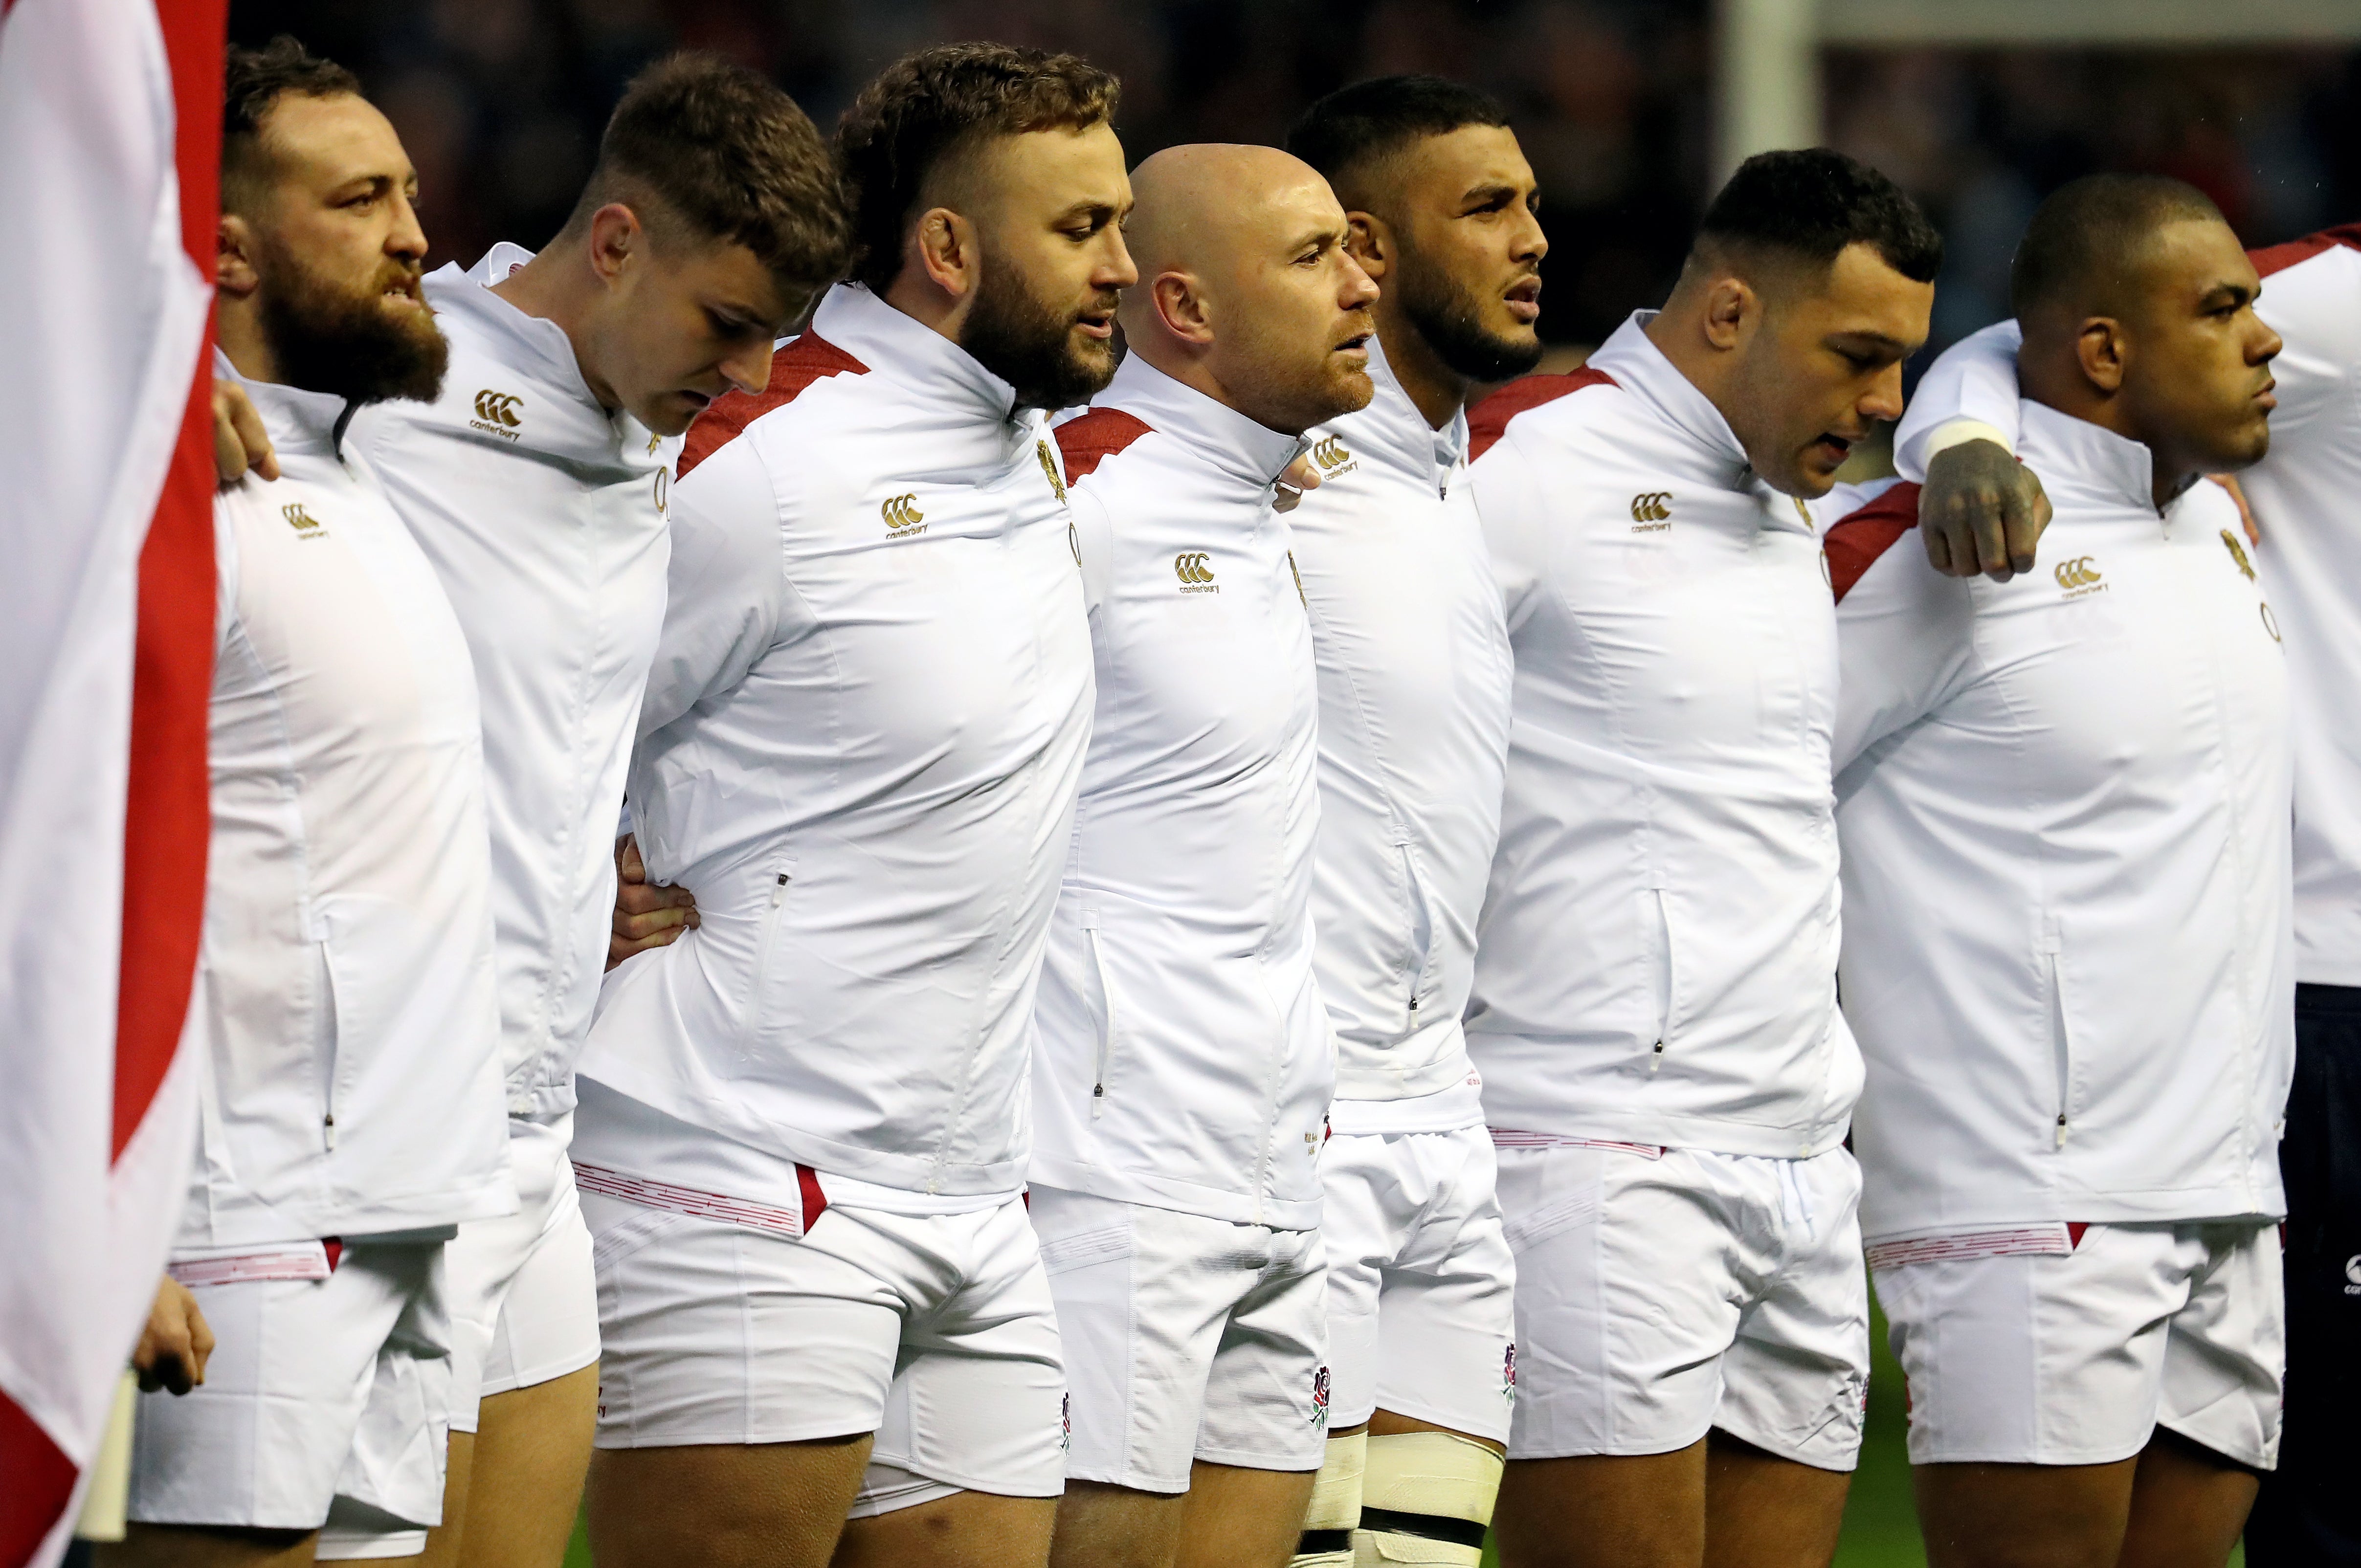 England players will be able to get closer during the national anthems (Andrew Milligan/PA)